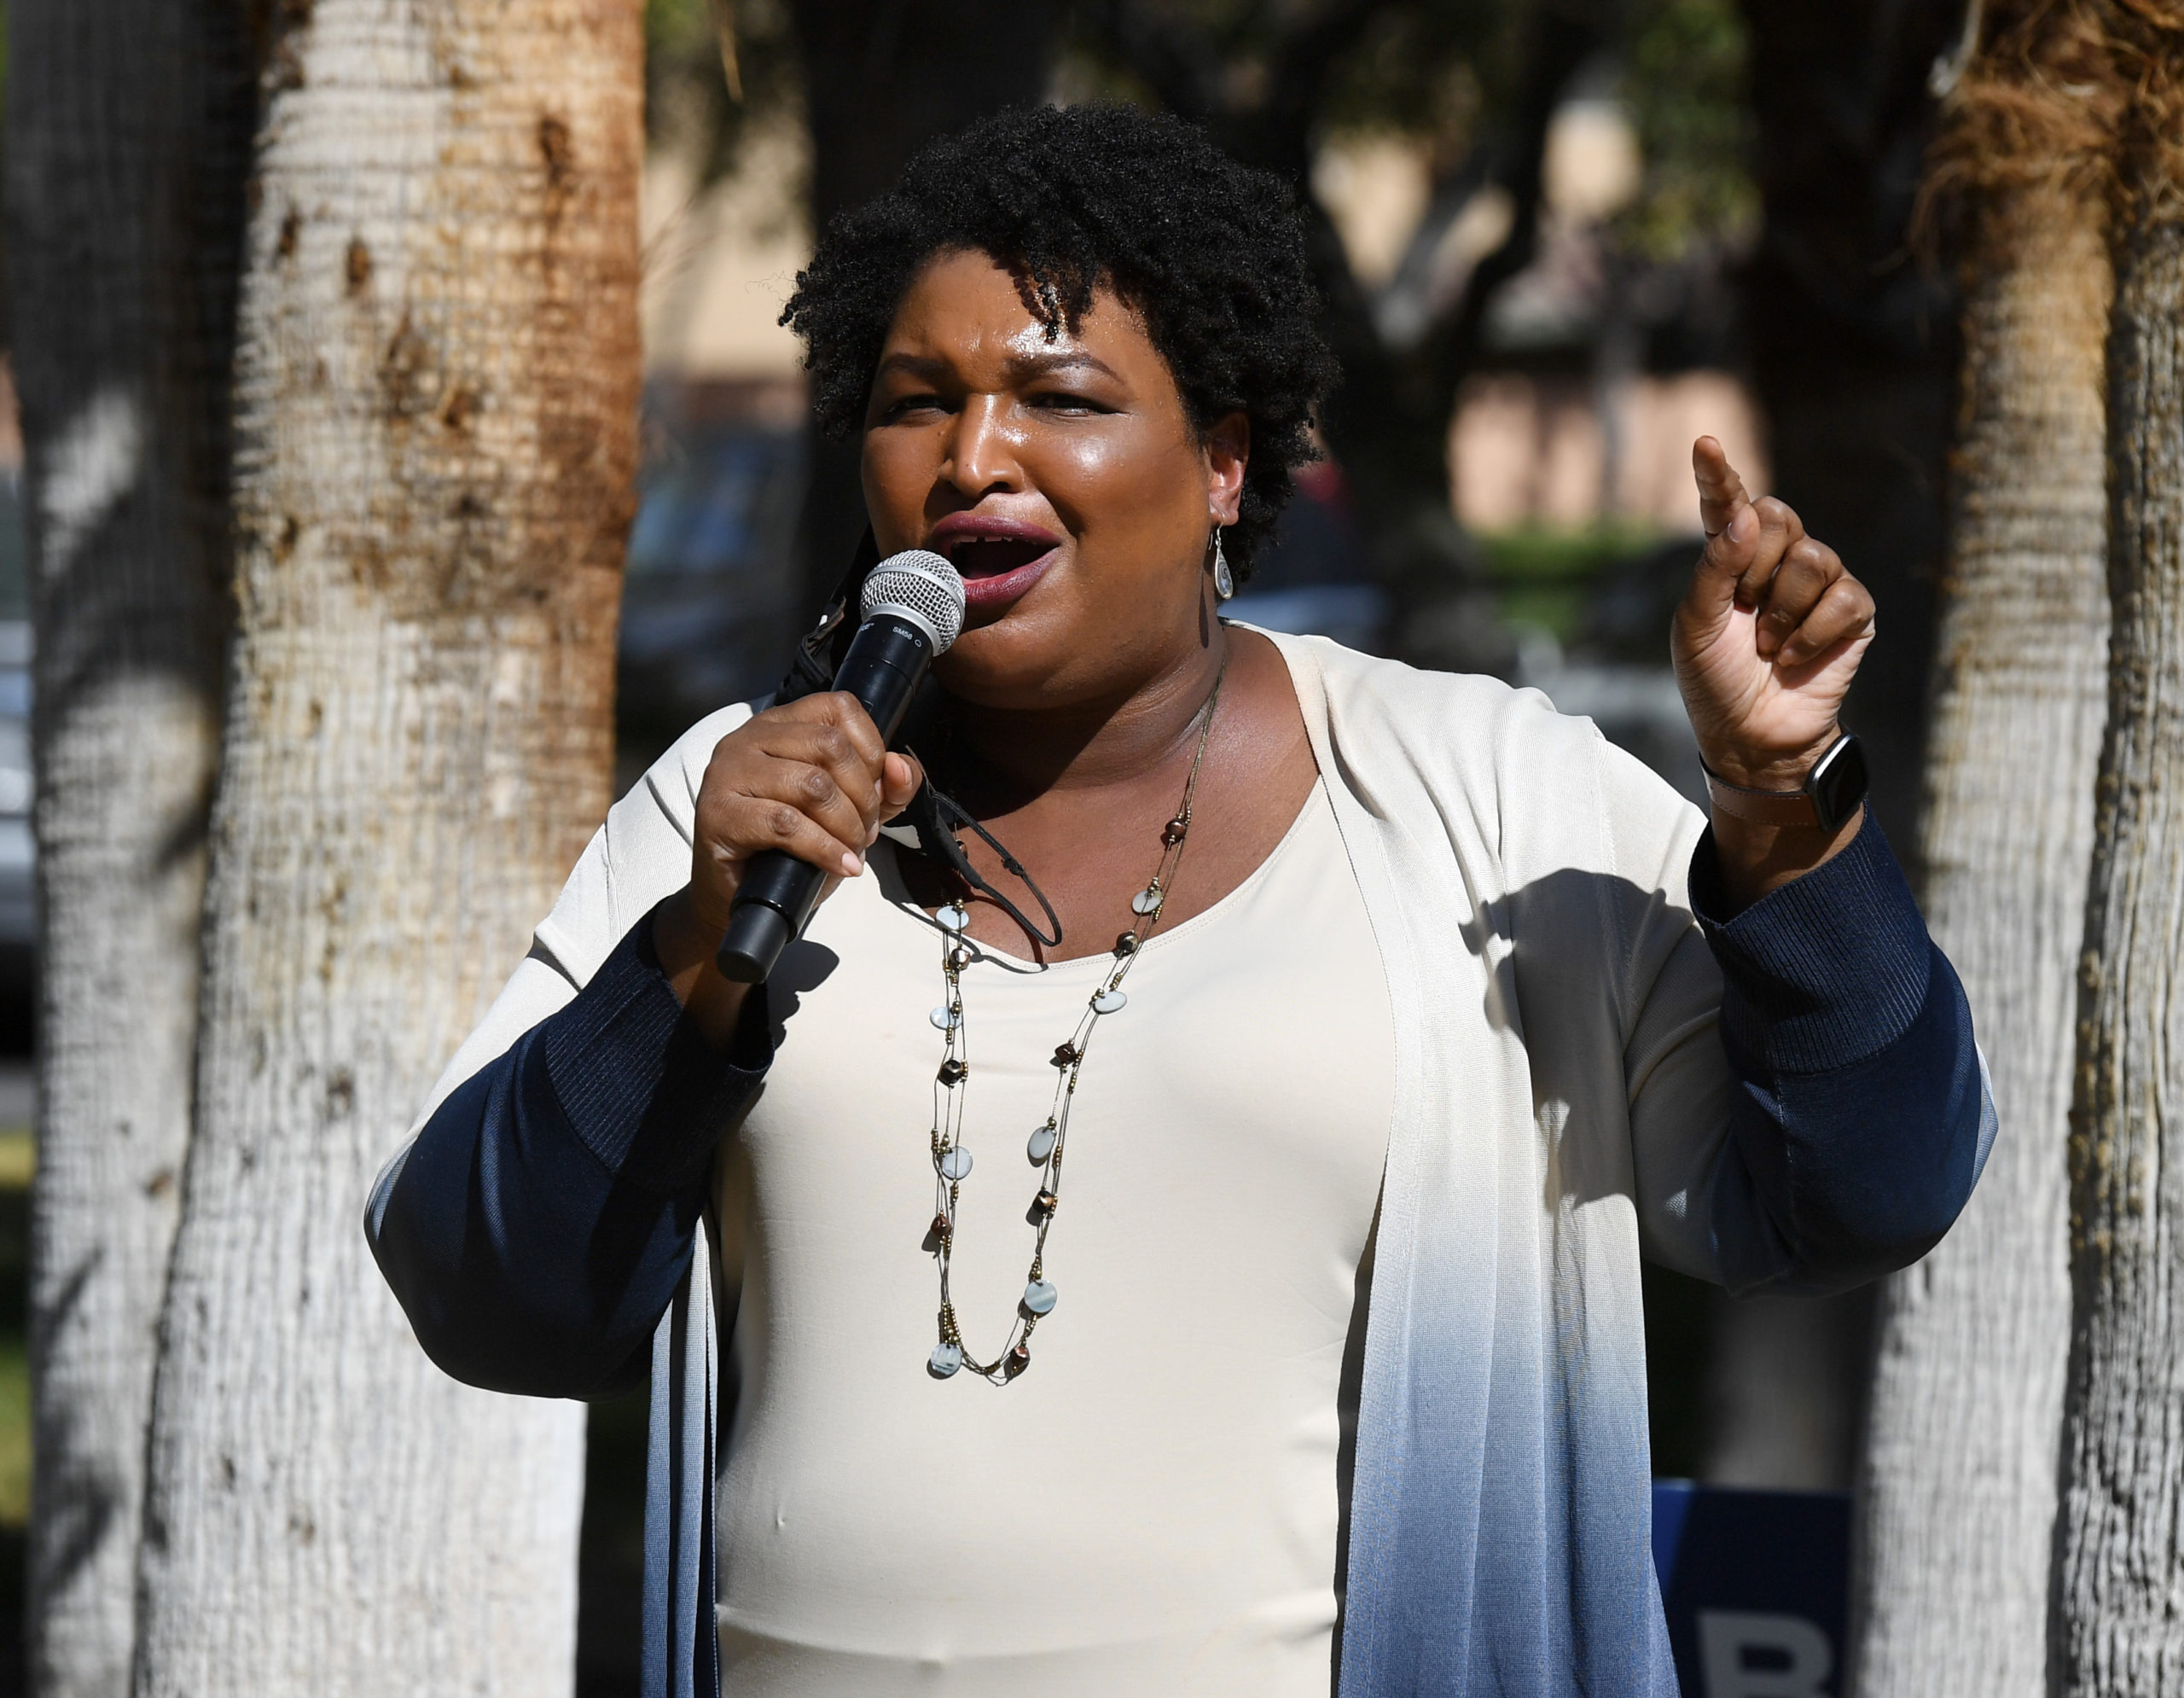 LAS VEGAS, NEVADA - OCTOBER 24: Former Georgia gubernatorial candidate Stacey Abrams speaks at a Democratic canvass kickoff as she campaigns for Joe Biden and Kamala Harris at Bruce Trent Park on October 24, 2020 in Las Vegas, Nevada. In-person early voting for the general election in the battleground state began on October 17 and continues through October 30. (Photo by Ethan Miller/Getty Images)